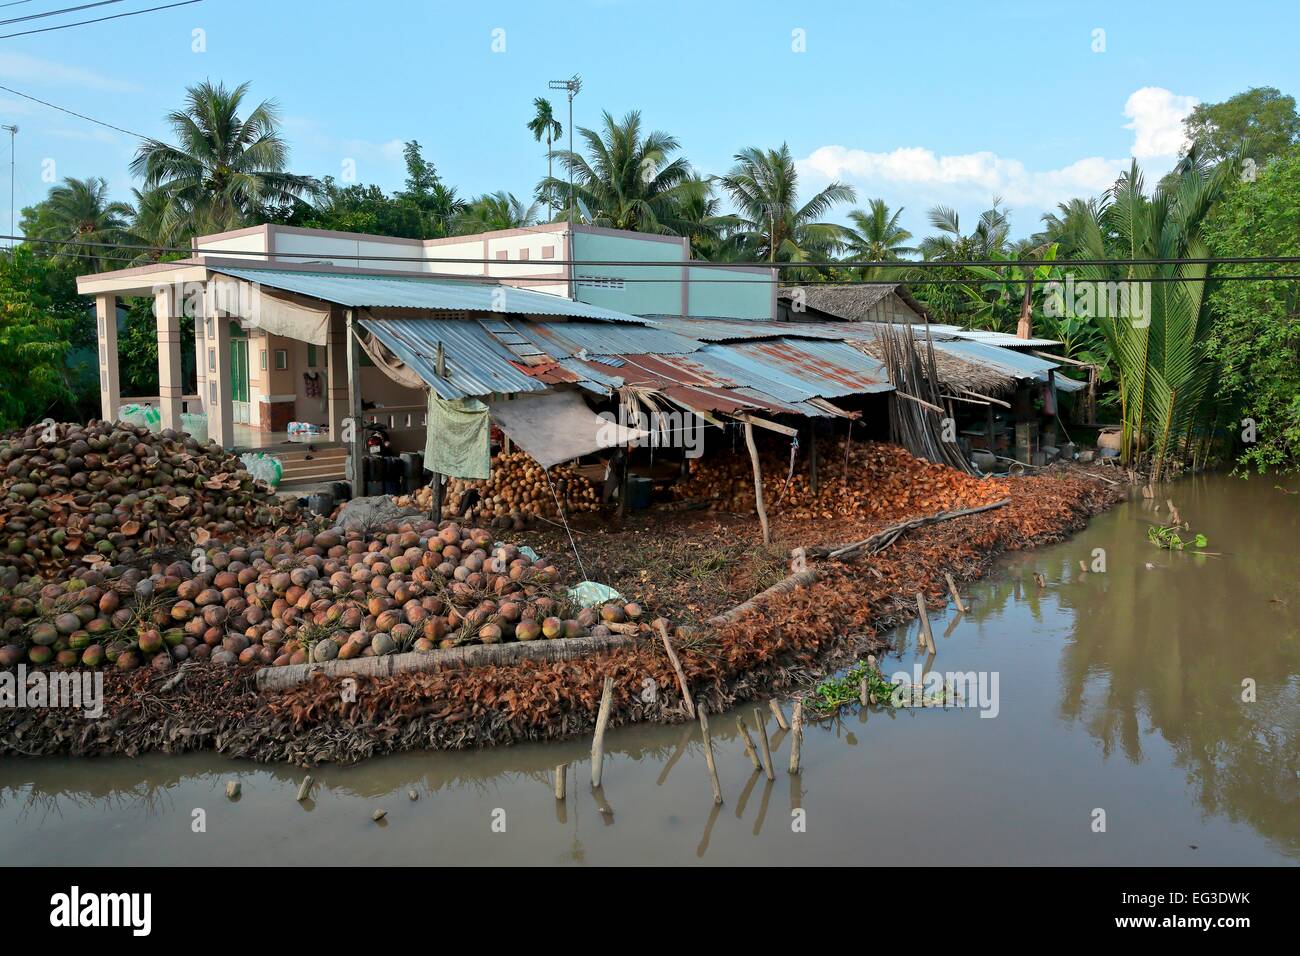 Coconut farm in Ben Tre, a major coconut growing area in the Mekong Delta where the Ben Tre Province is often known as  'The Coconut Land' Stock Photo